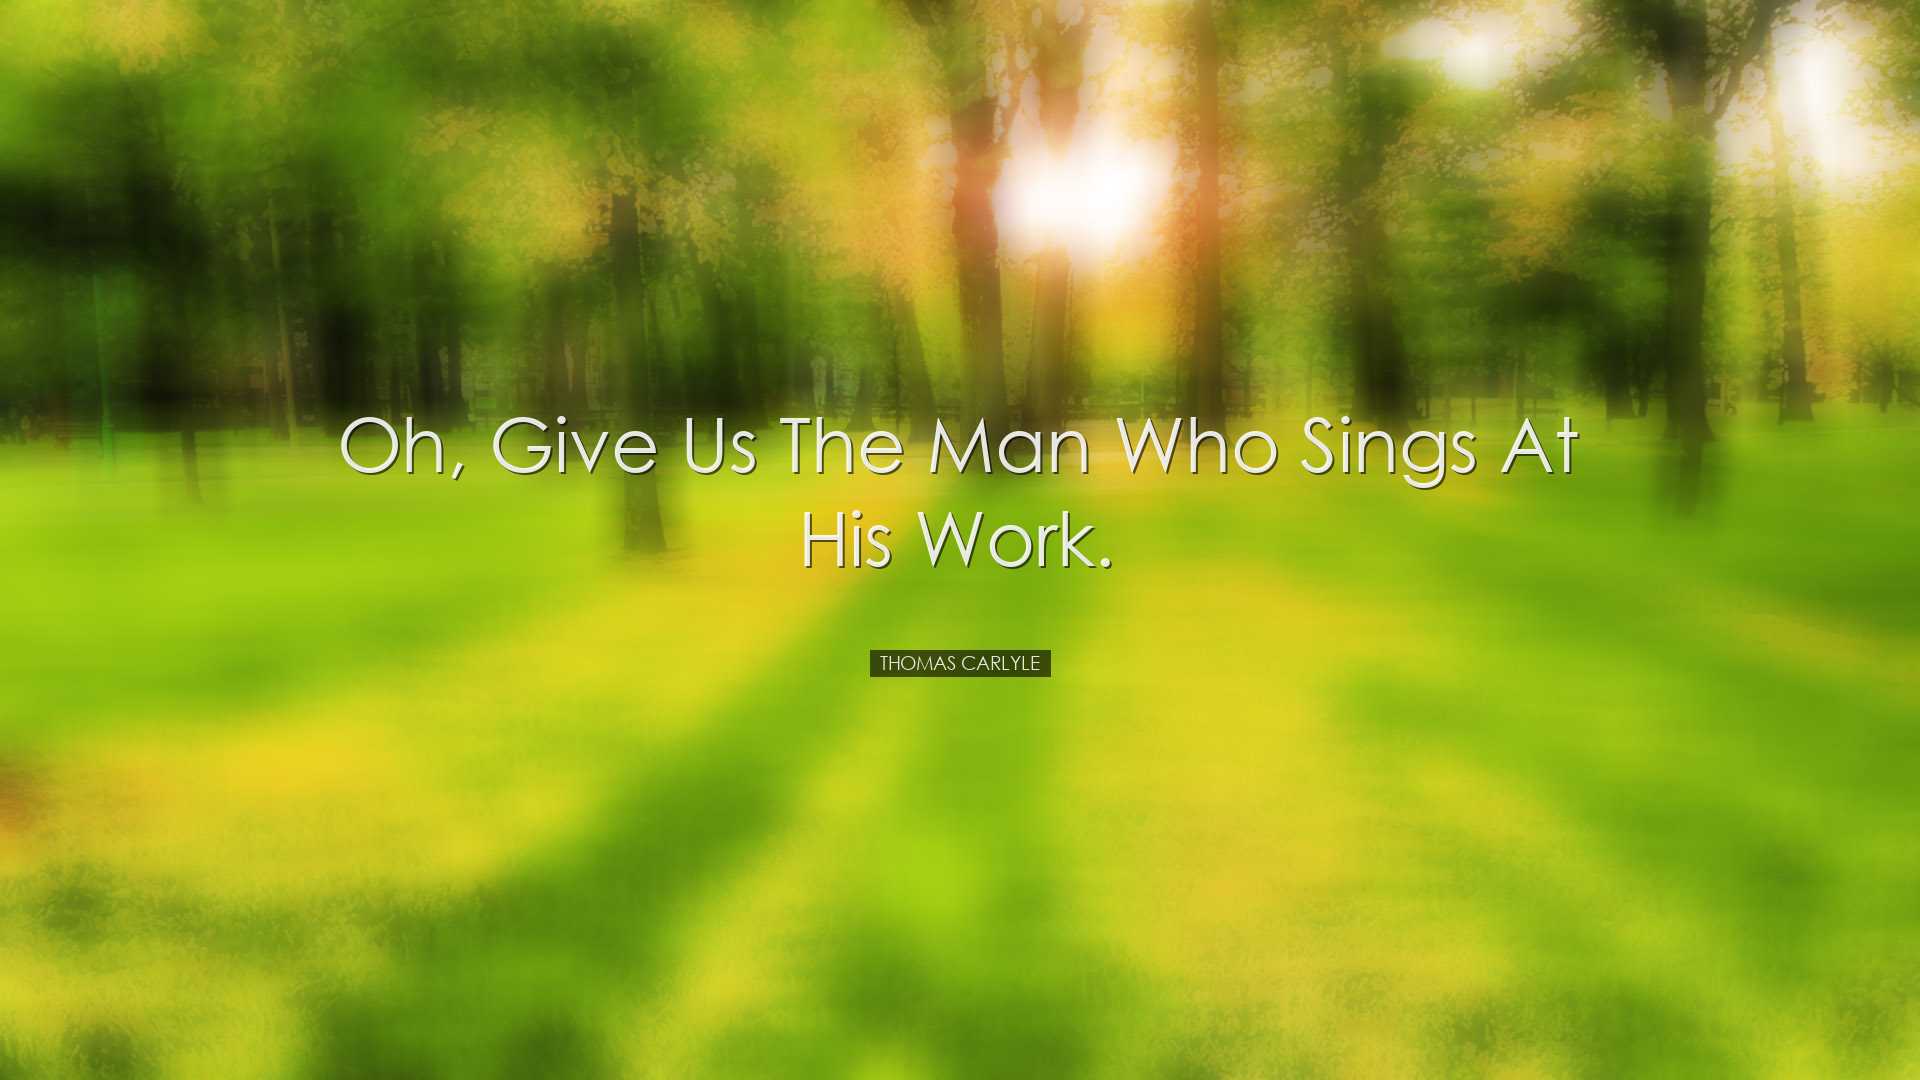 Oh, give us the man who sings at his work. - Thomas Carlyle